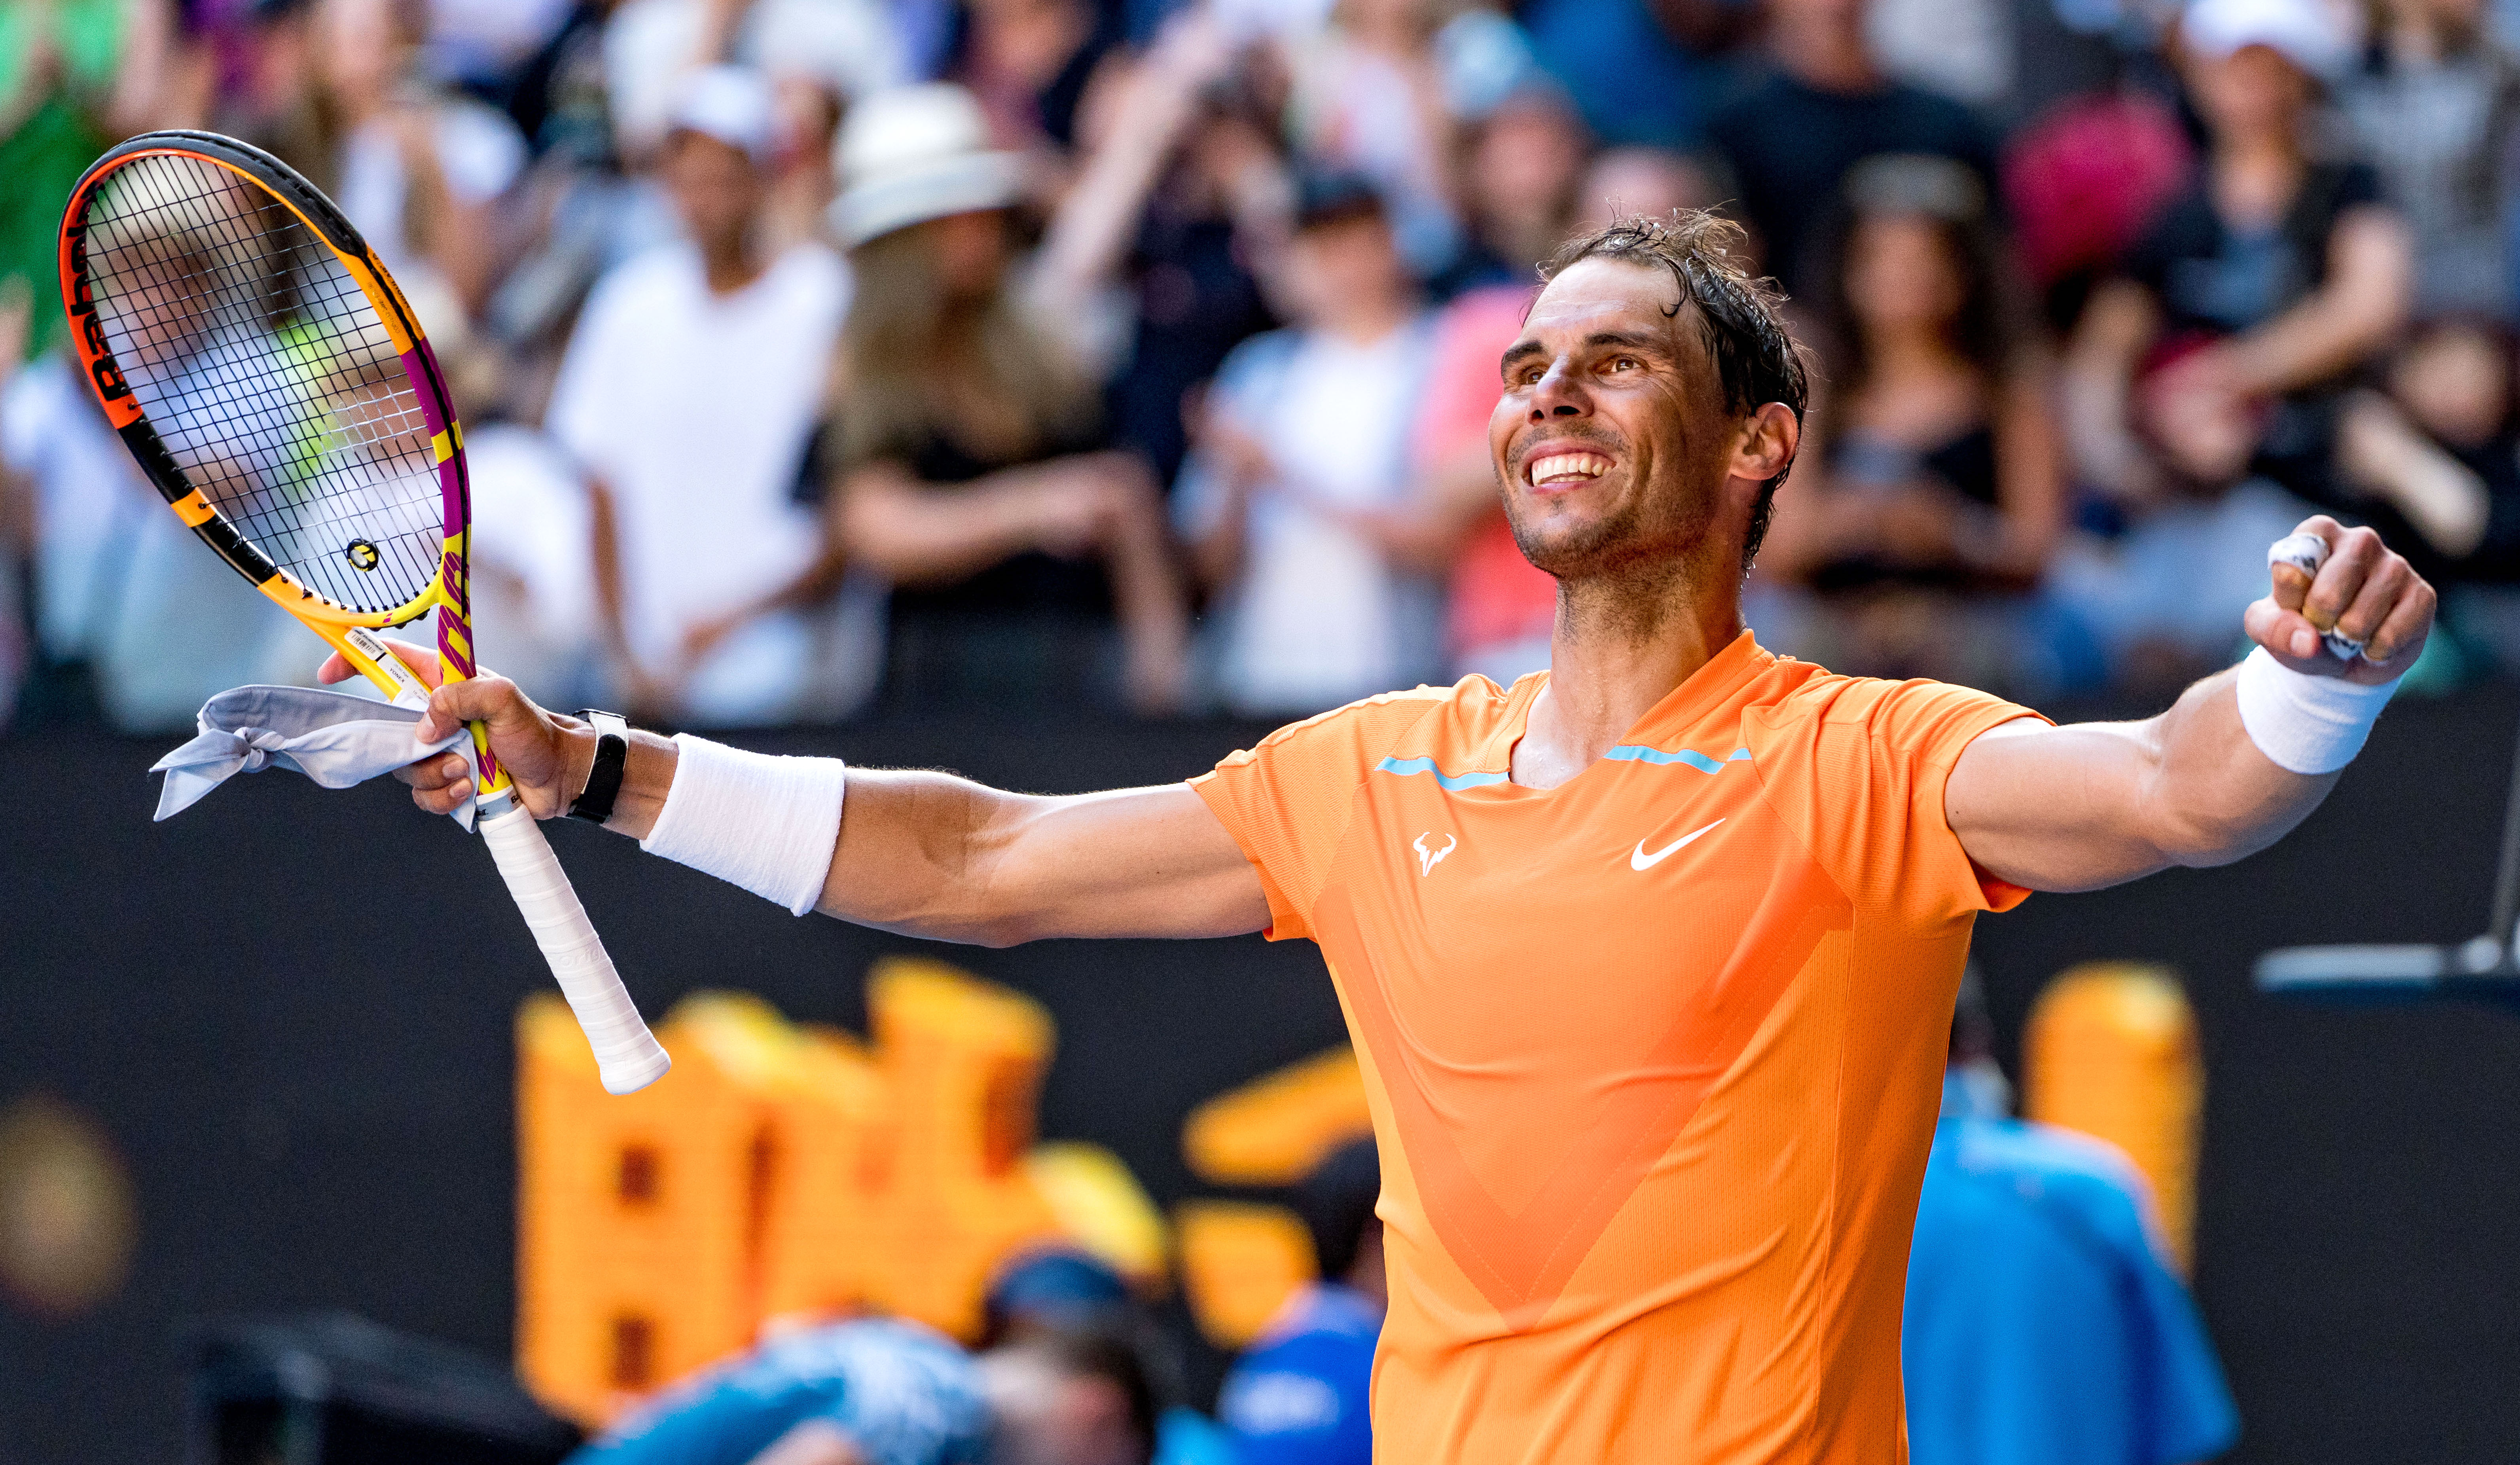 Rafael Nadal wins opening match at Australian Open, ties Ivan Lendl for third-most career wins for a man in Open Era